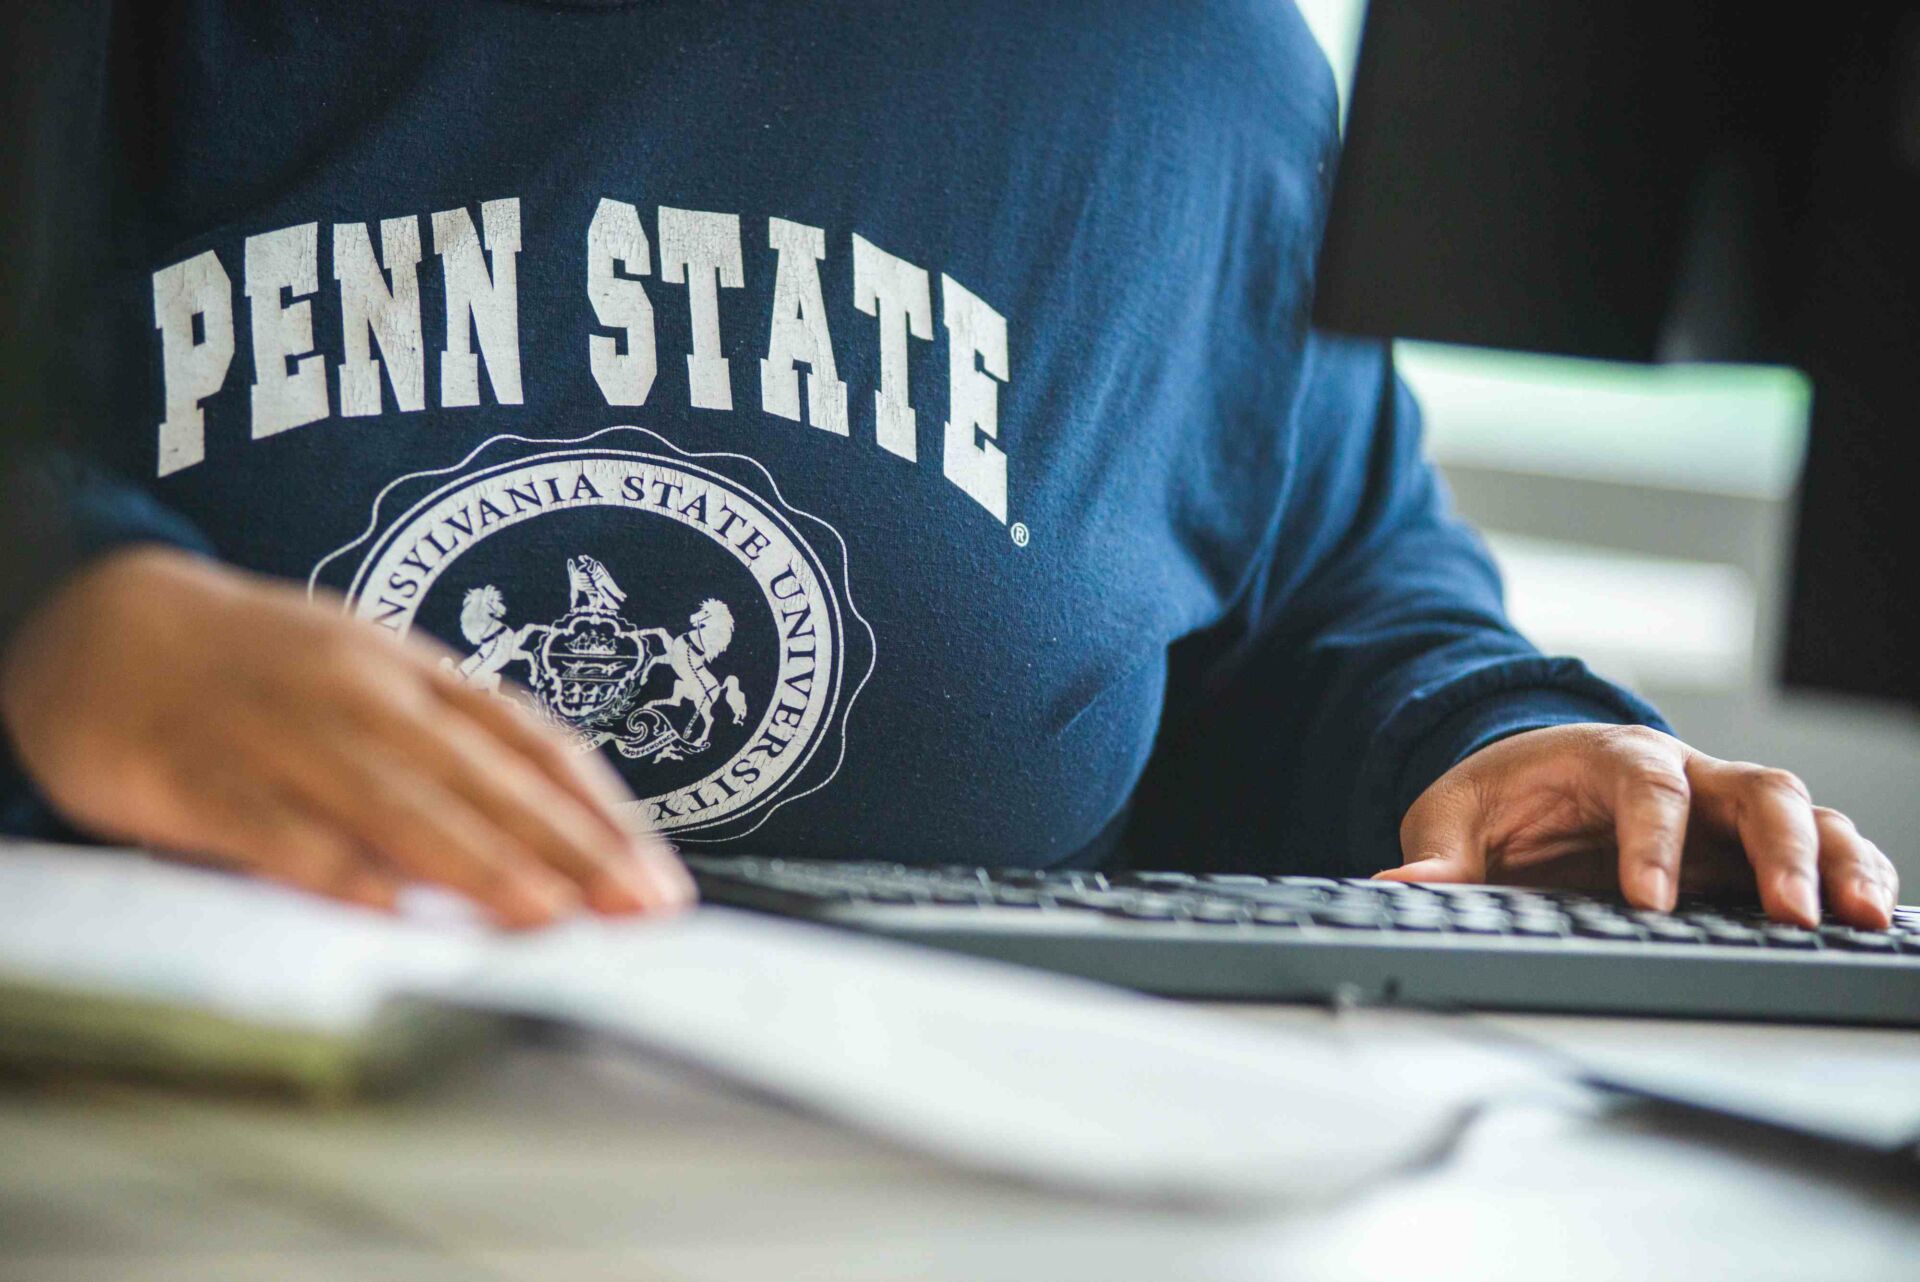 Student wearing a Penn State sweatshirt sitting at a computer with a notebook